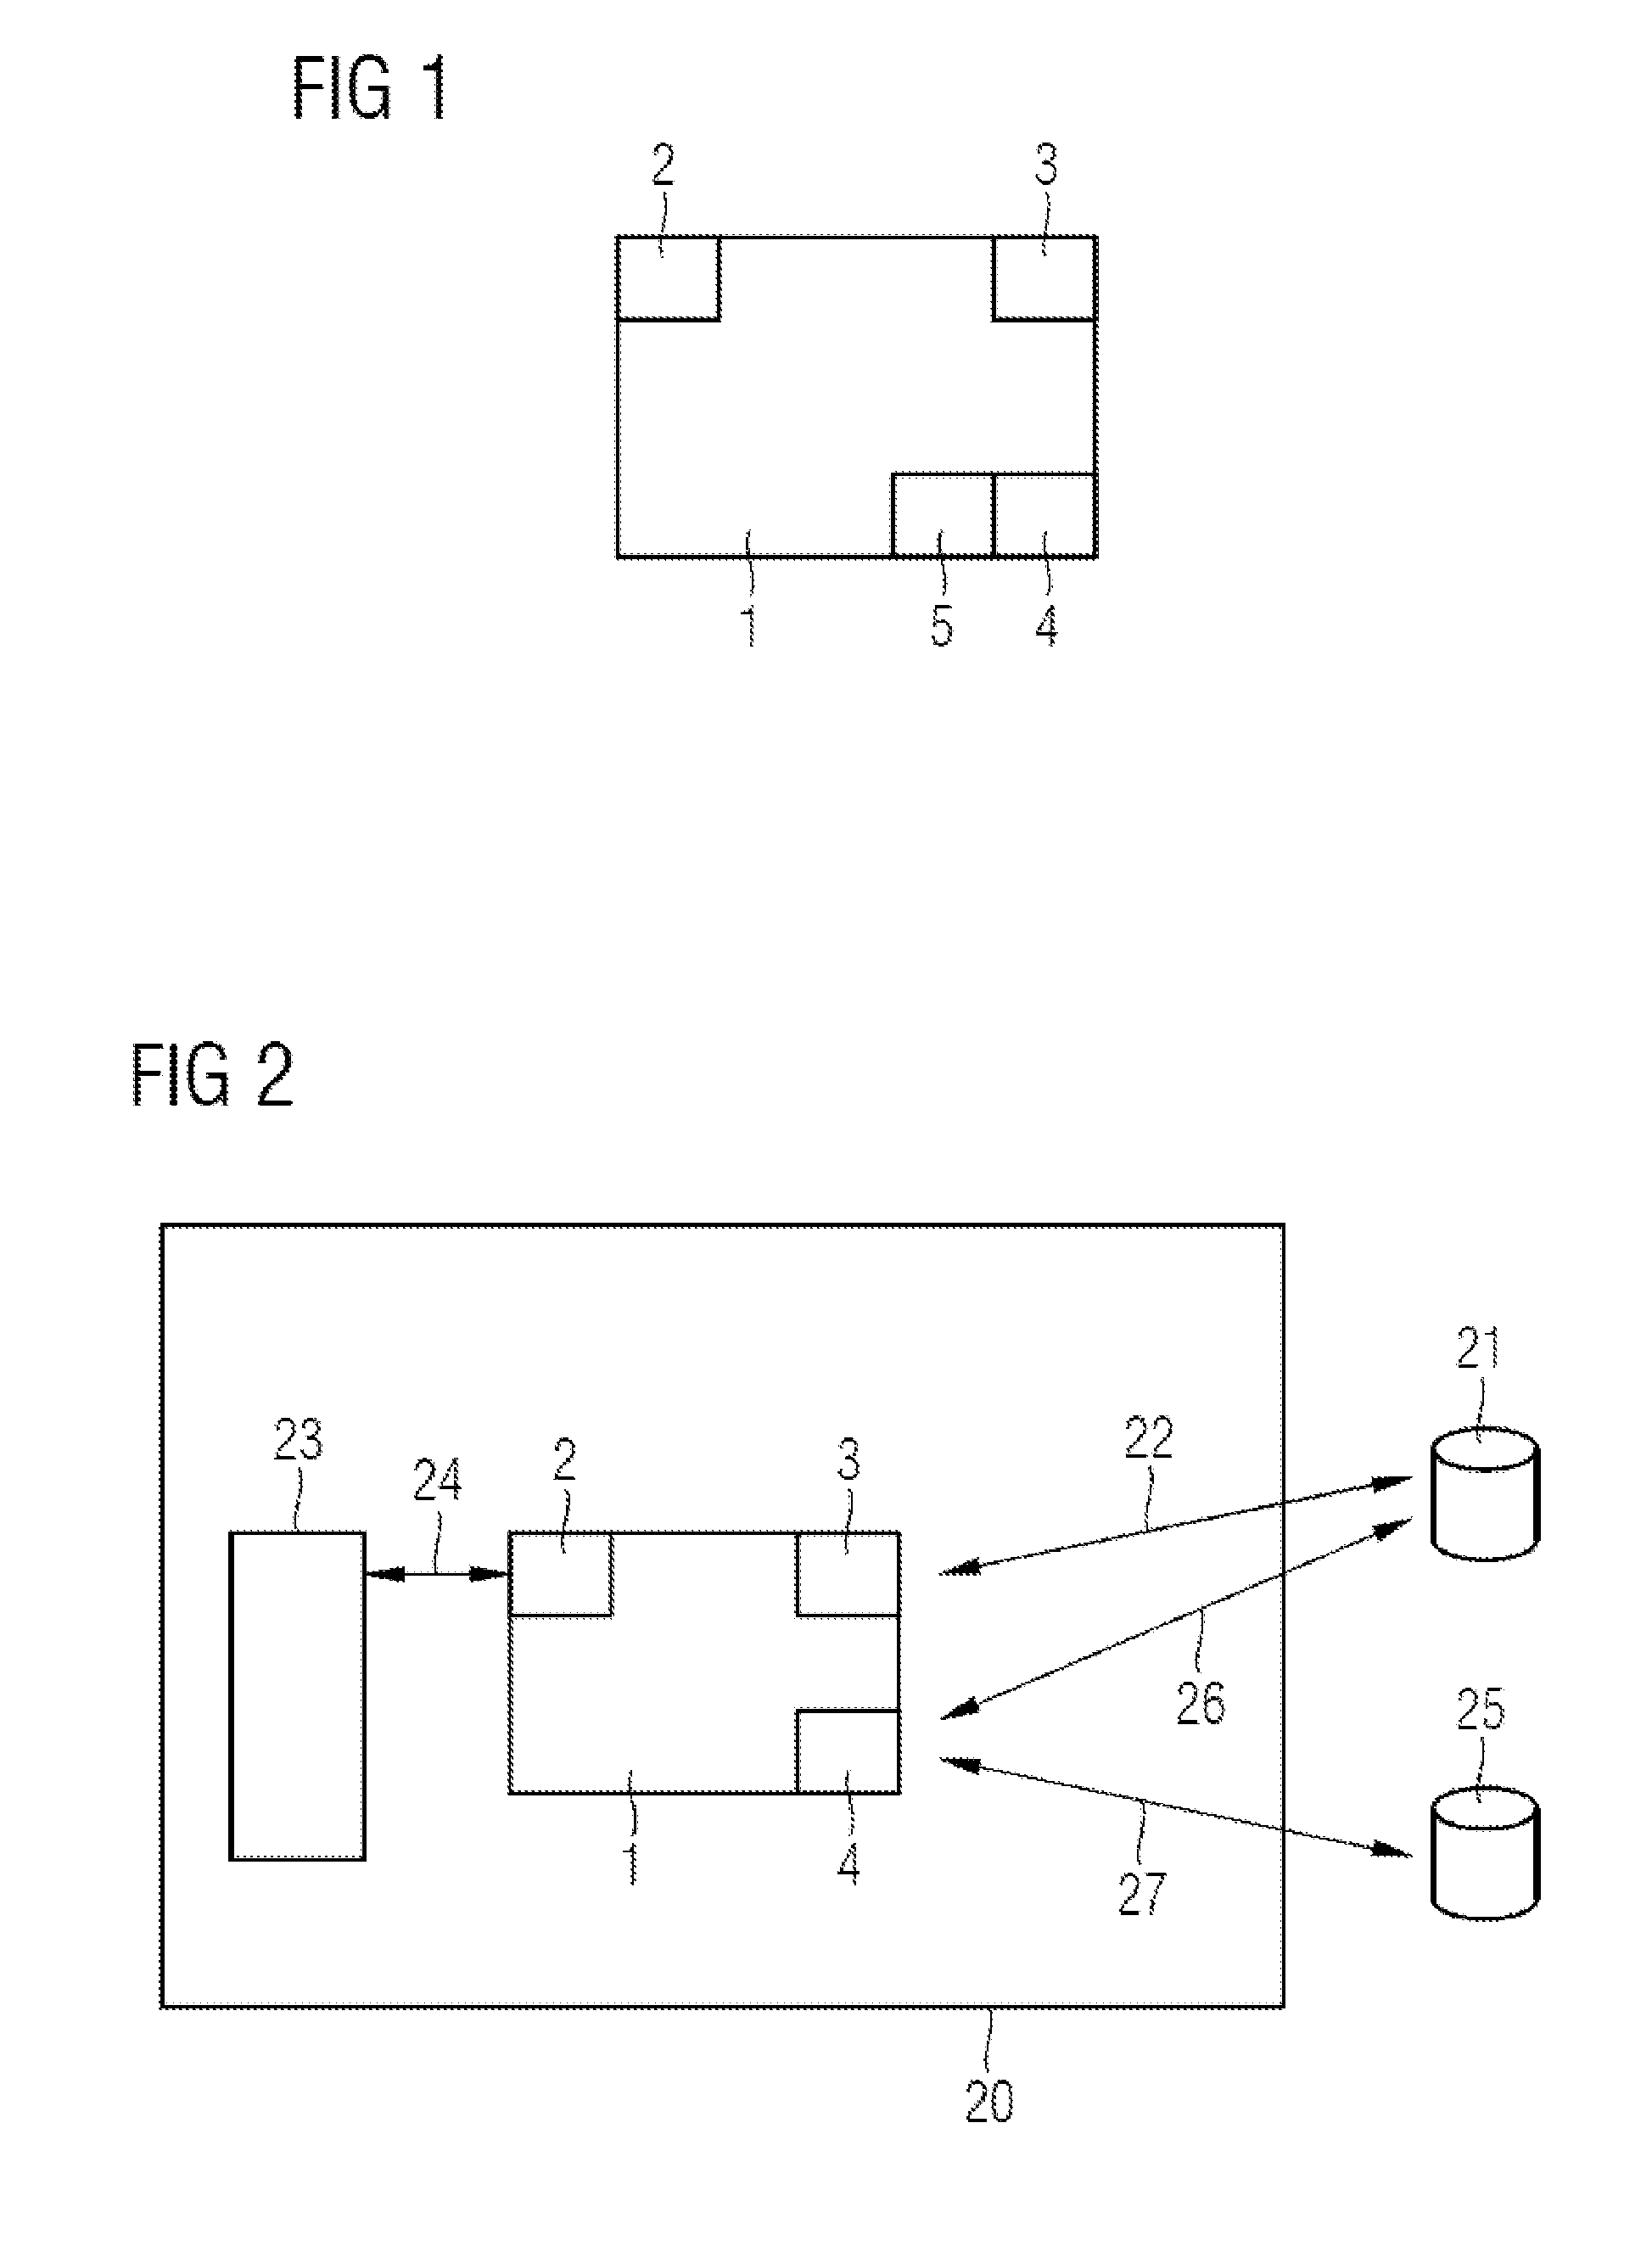 Method and Apparatus for Representing an Account Movement